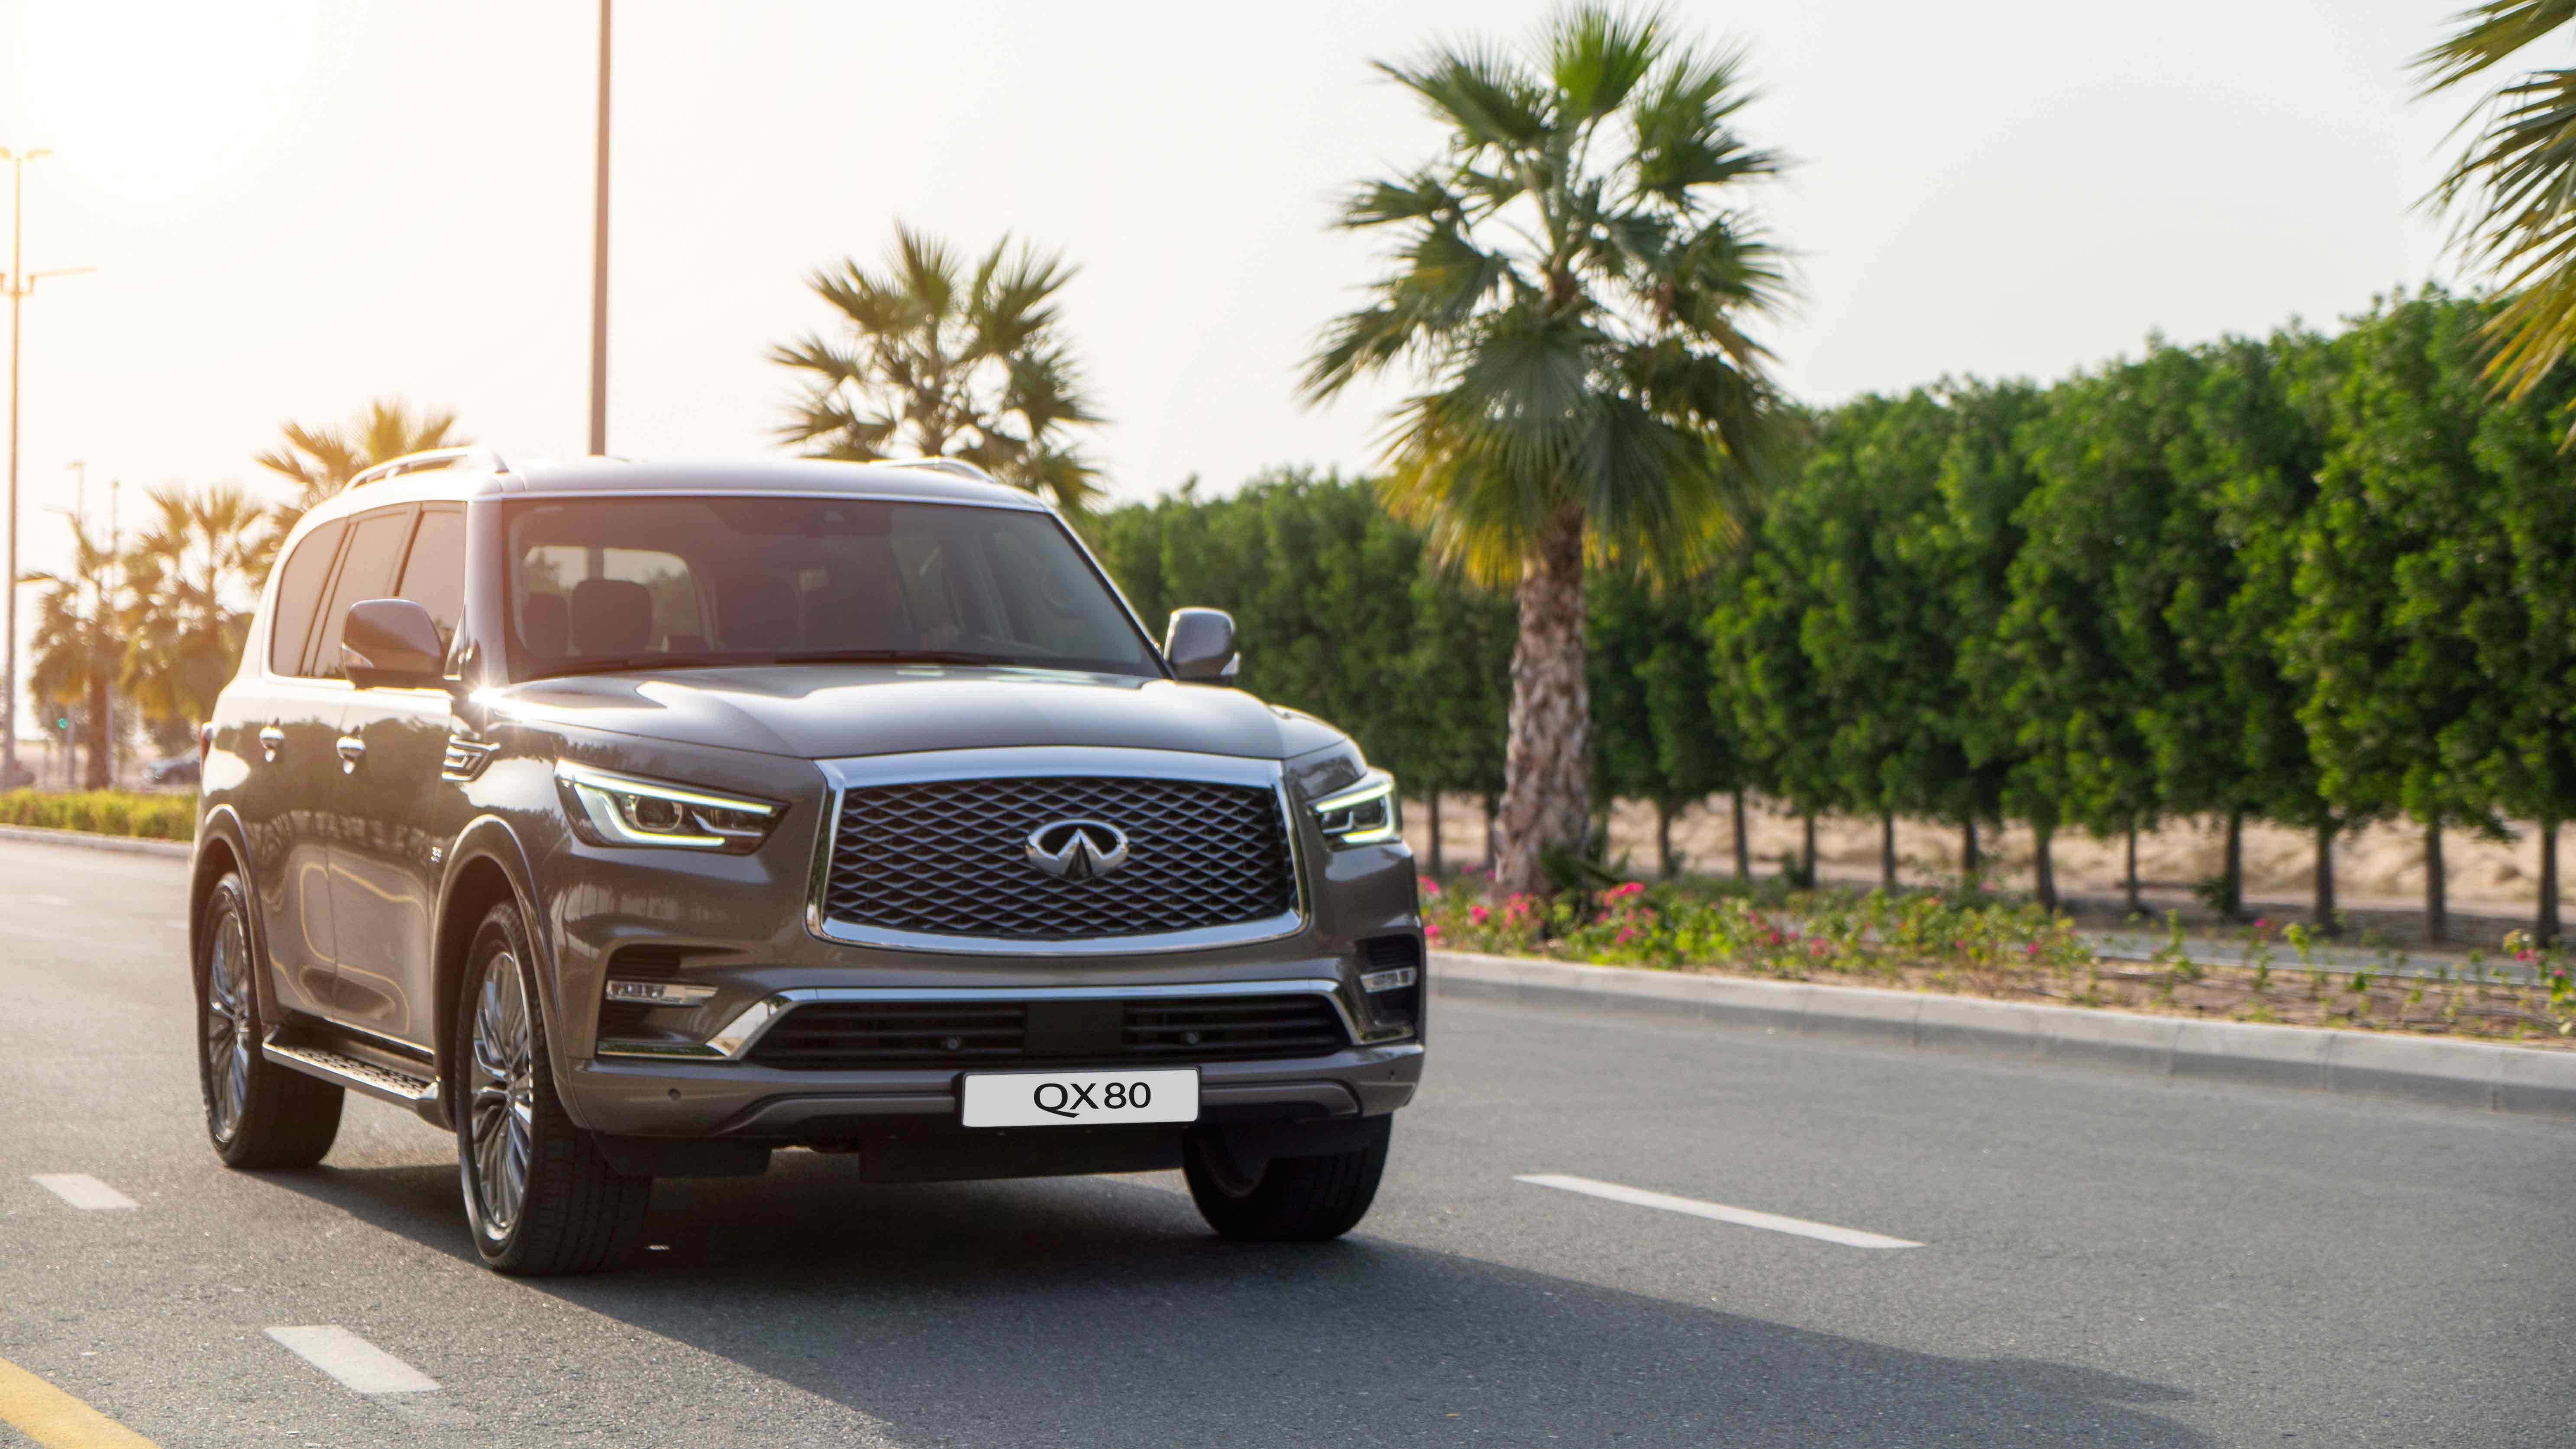 An expo-nential QX80 offer brought to you by INFINITI of Arabian Automobiles